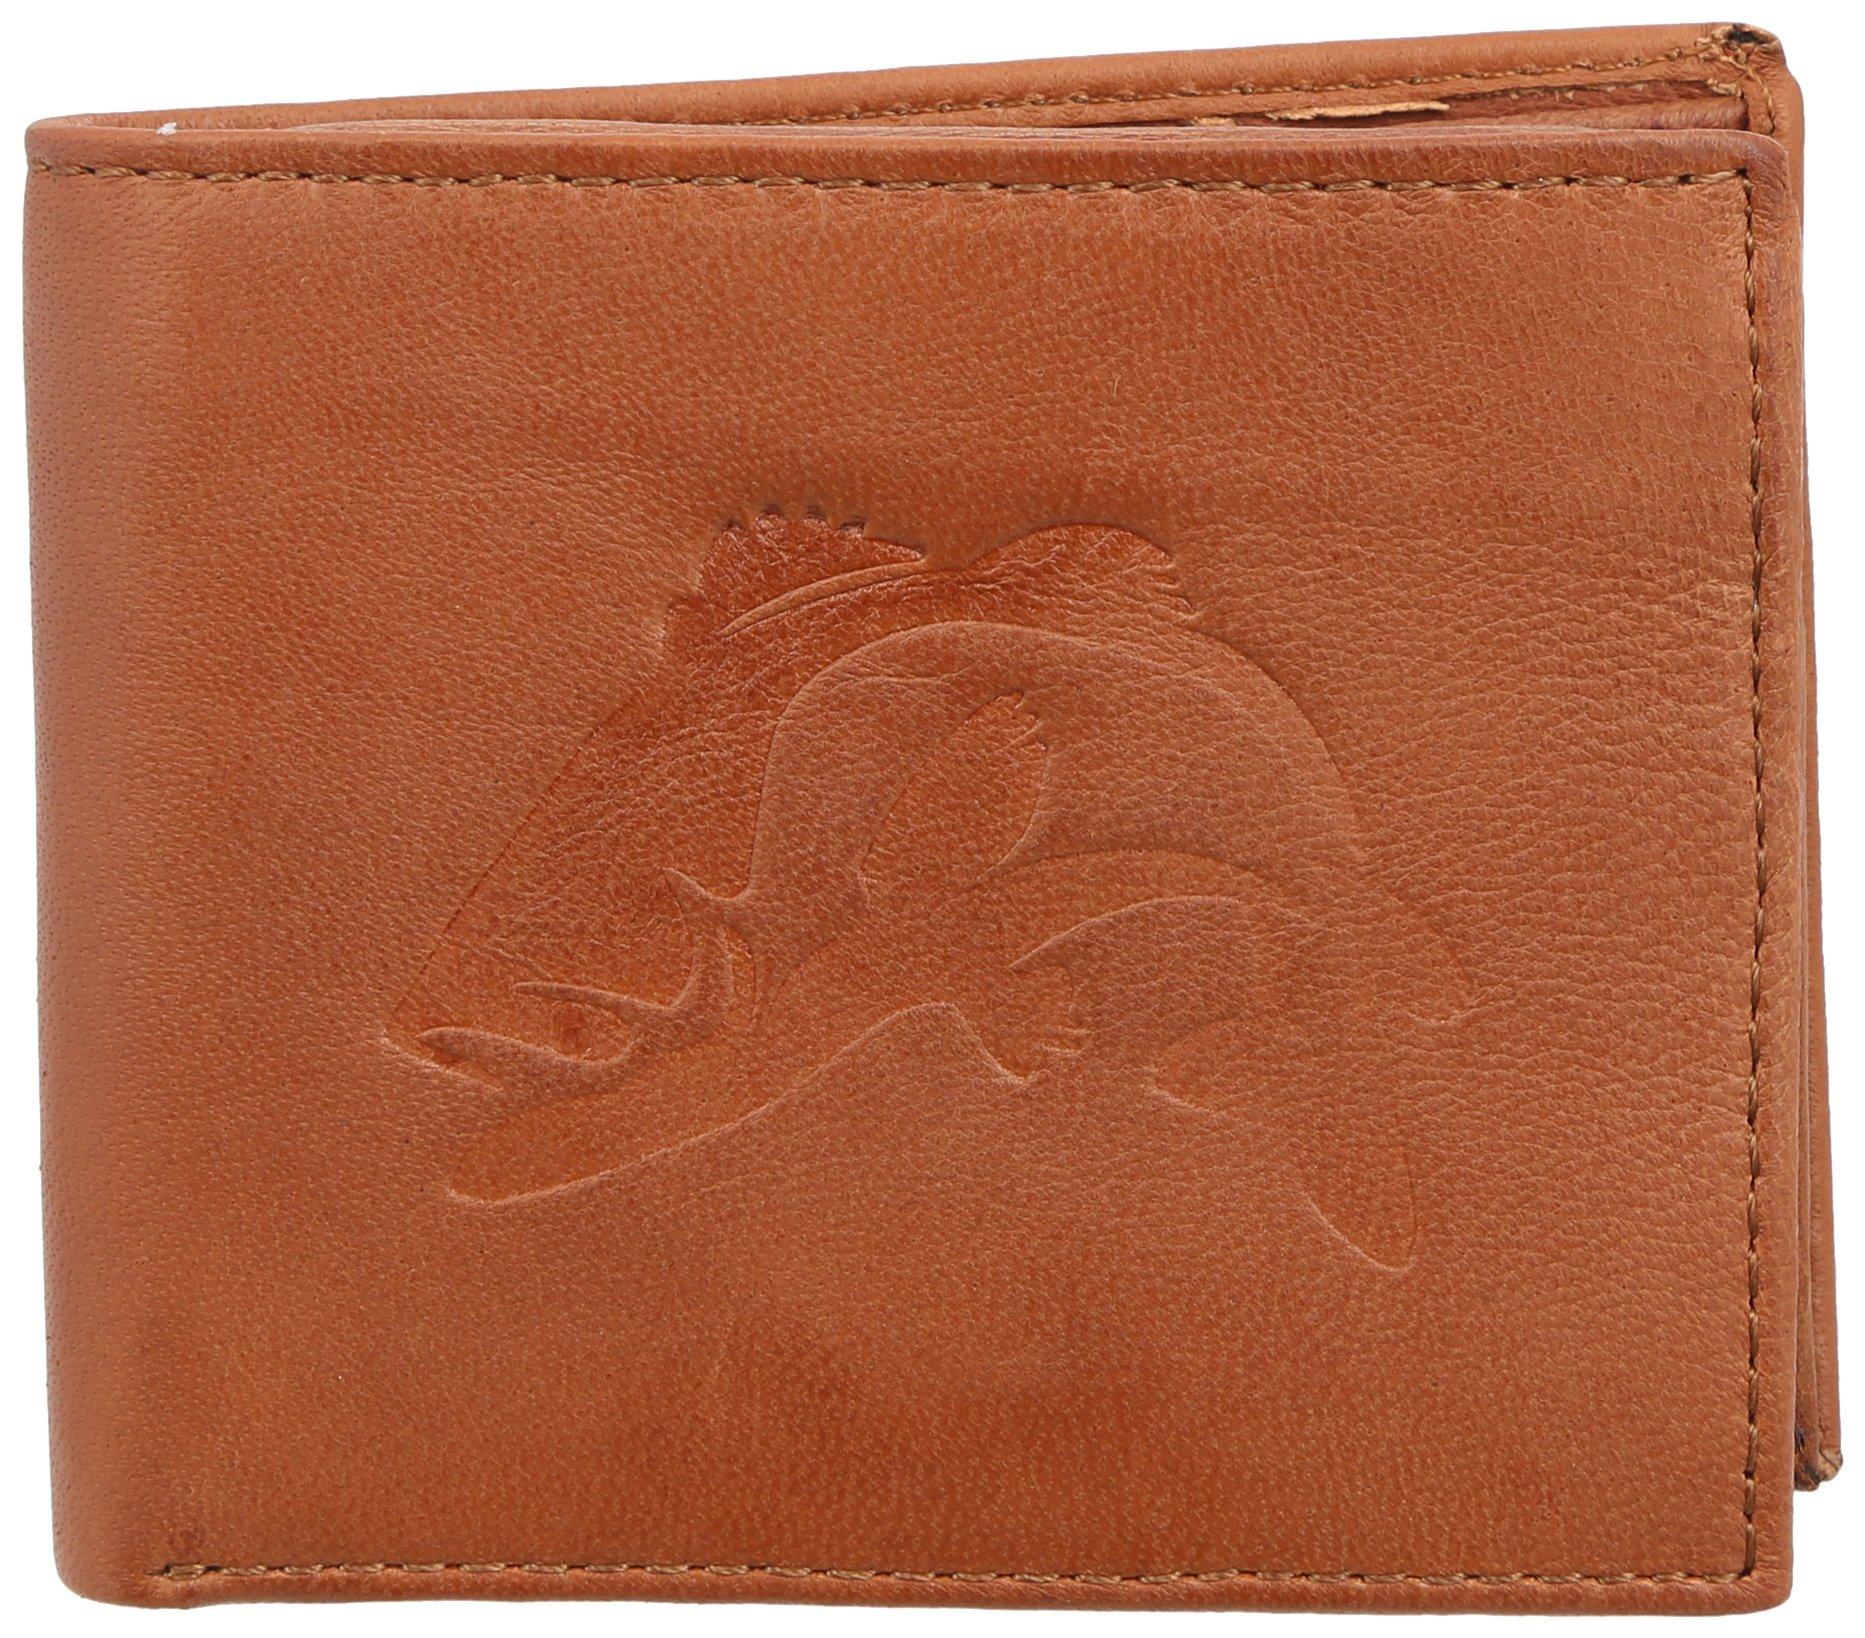 Mens Fish Leather Passcase Wallet